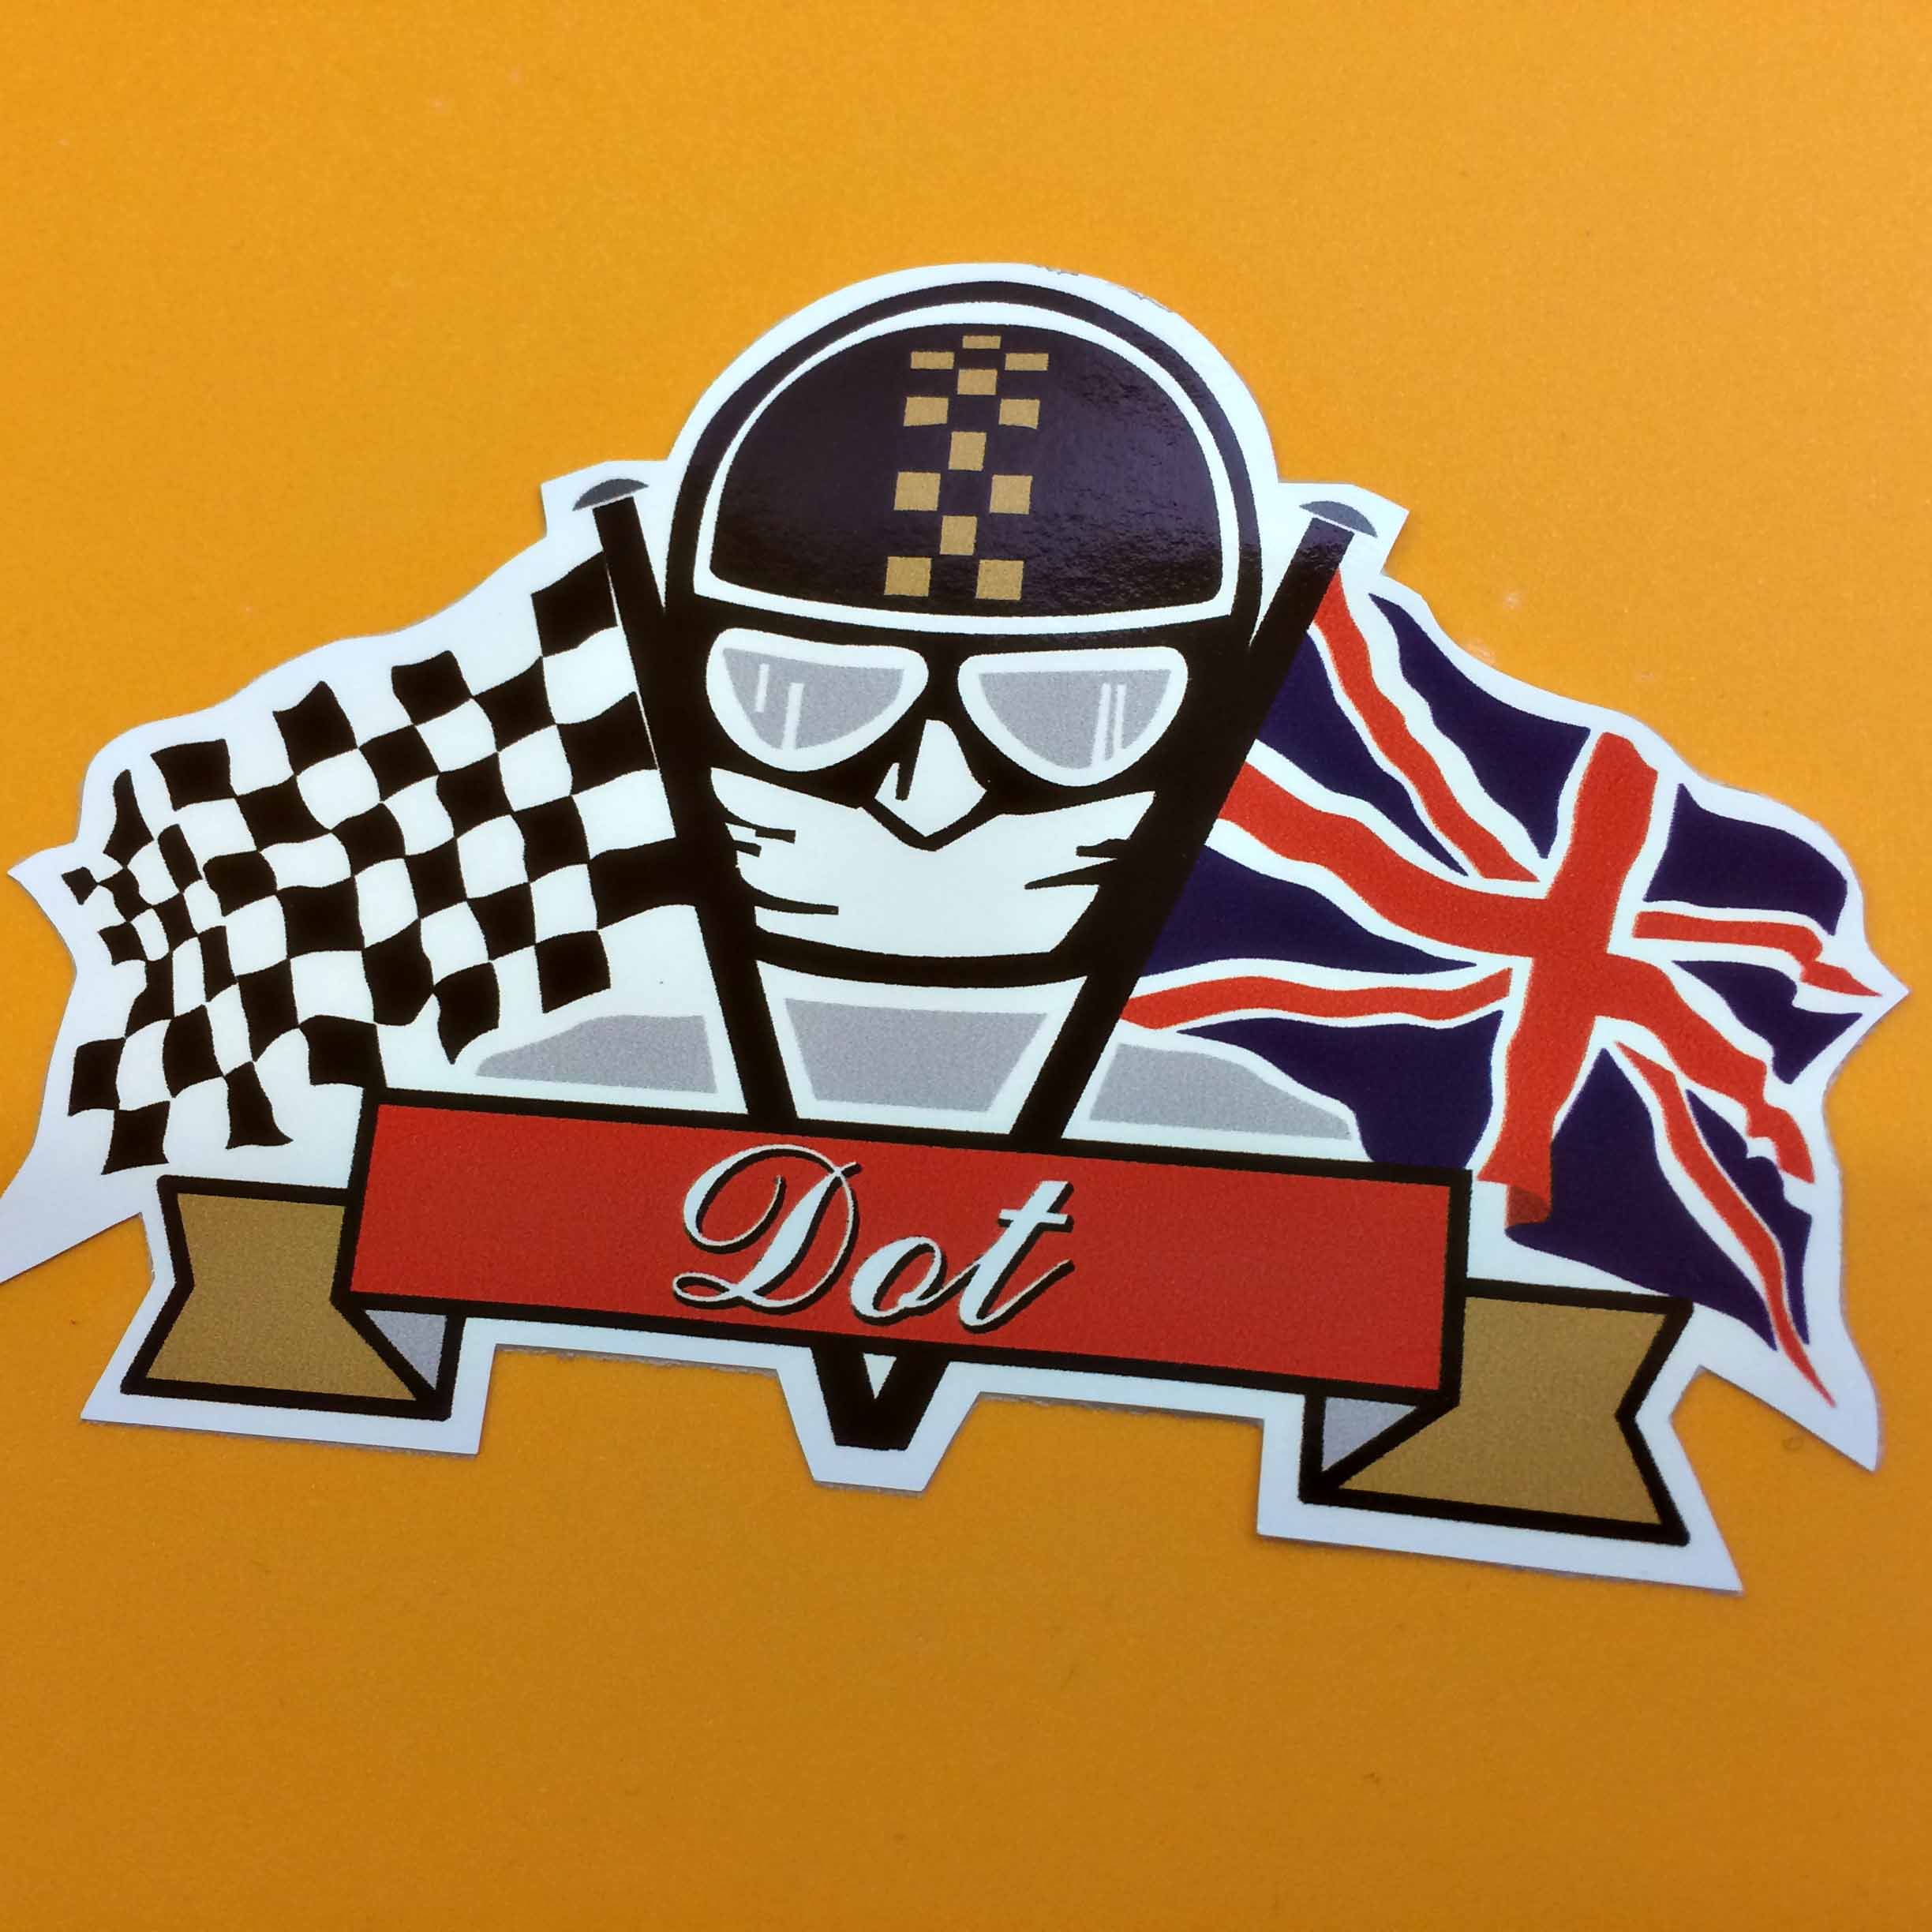 Dot in white italic font on a red and gold banner. Above this is the face of a motorcyclist wearing goggles, a white scarf and a black helmet with a gold chequer strip. He sits between two crossed flags - a black and white chequer and a Union Jack.